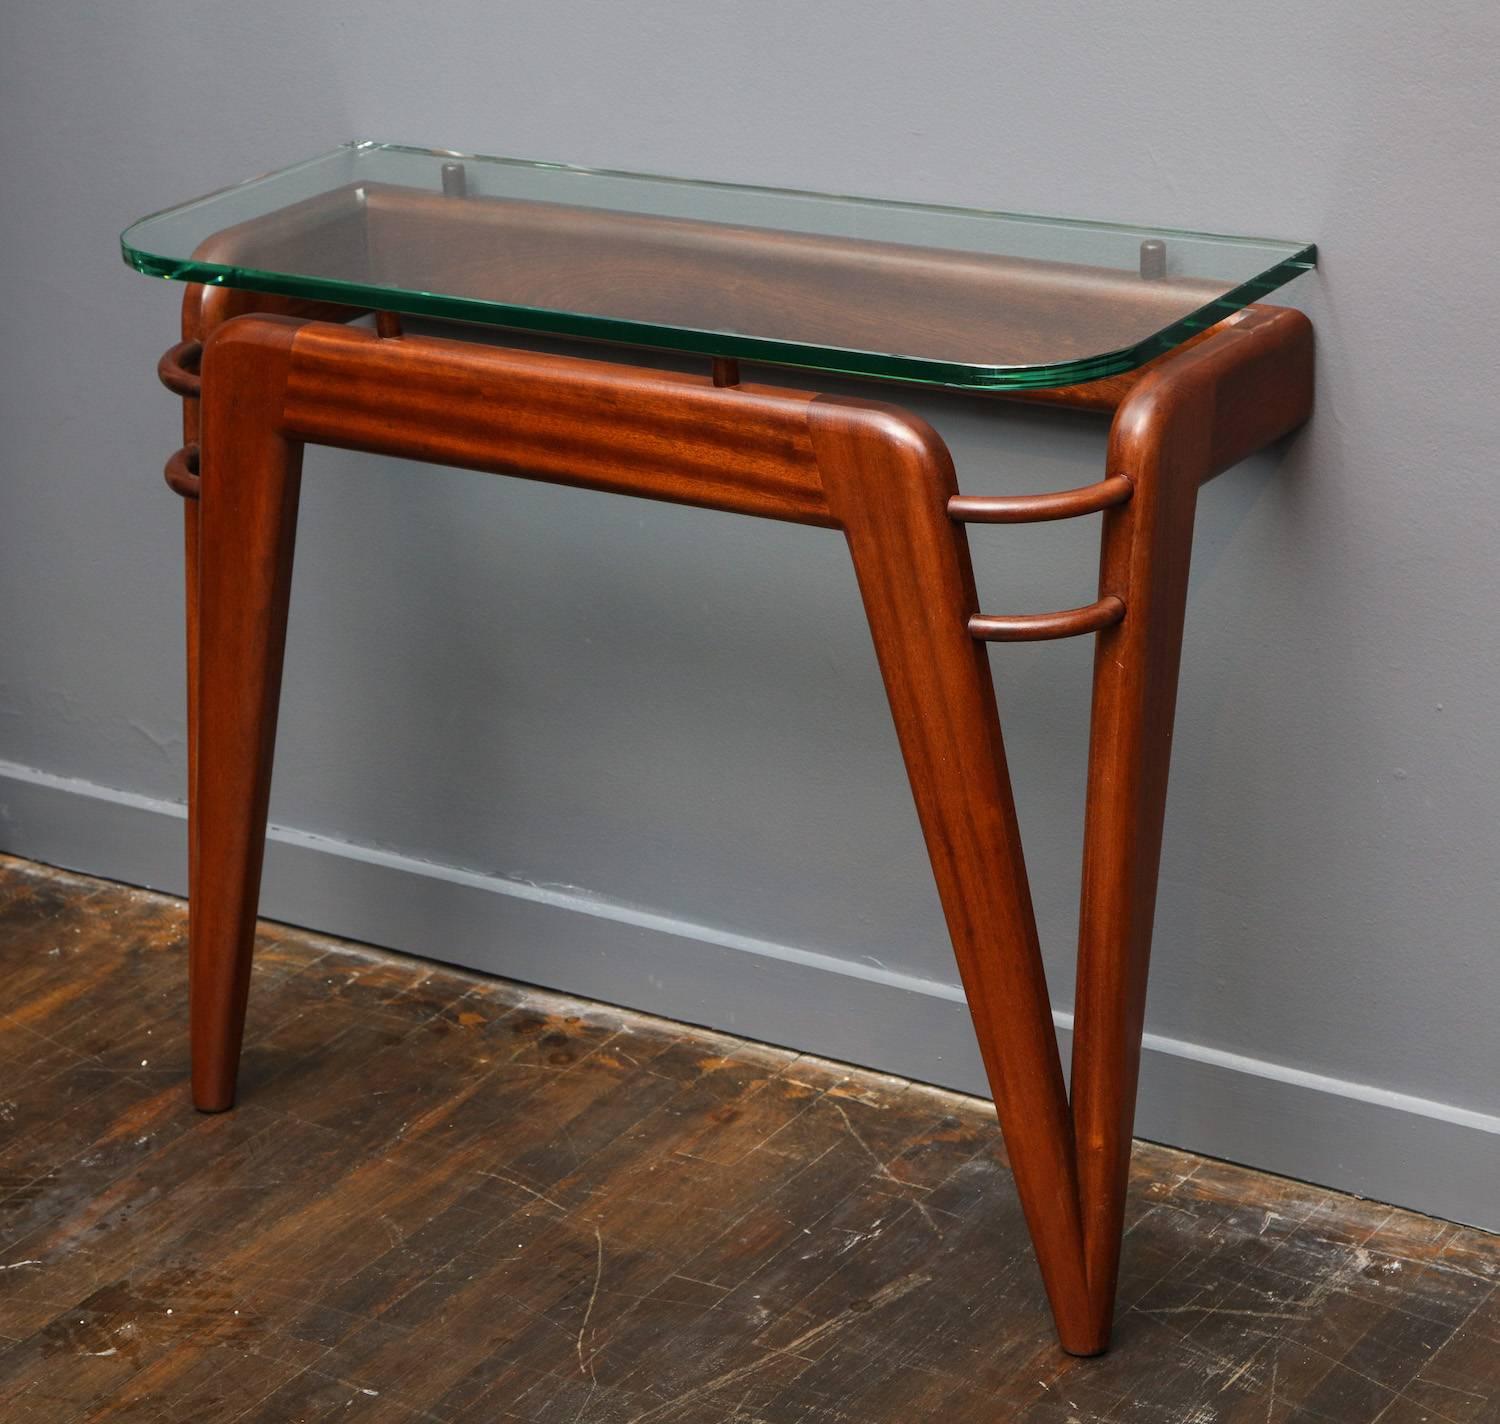 Custom design wall console.
Studio-built mahogany console table that secures itself to the wall. Thick floating glass top with rounded corners. Can be made in custom sizes. 12-15 week lead time.